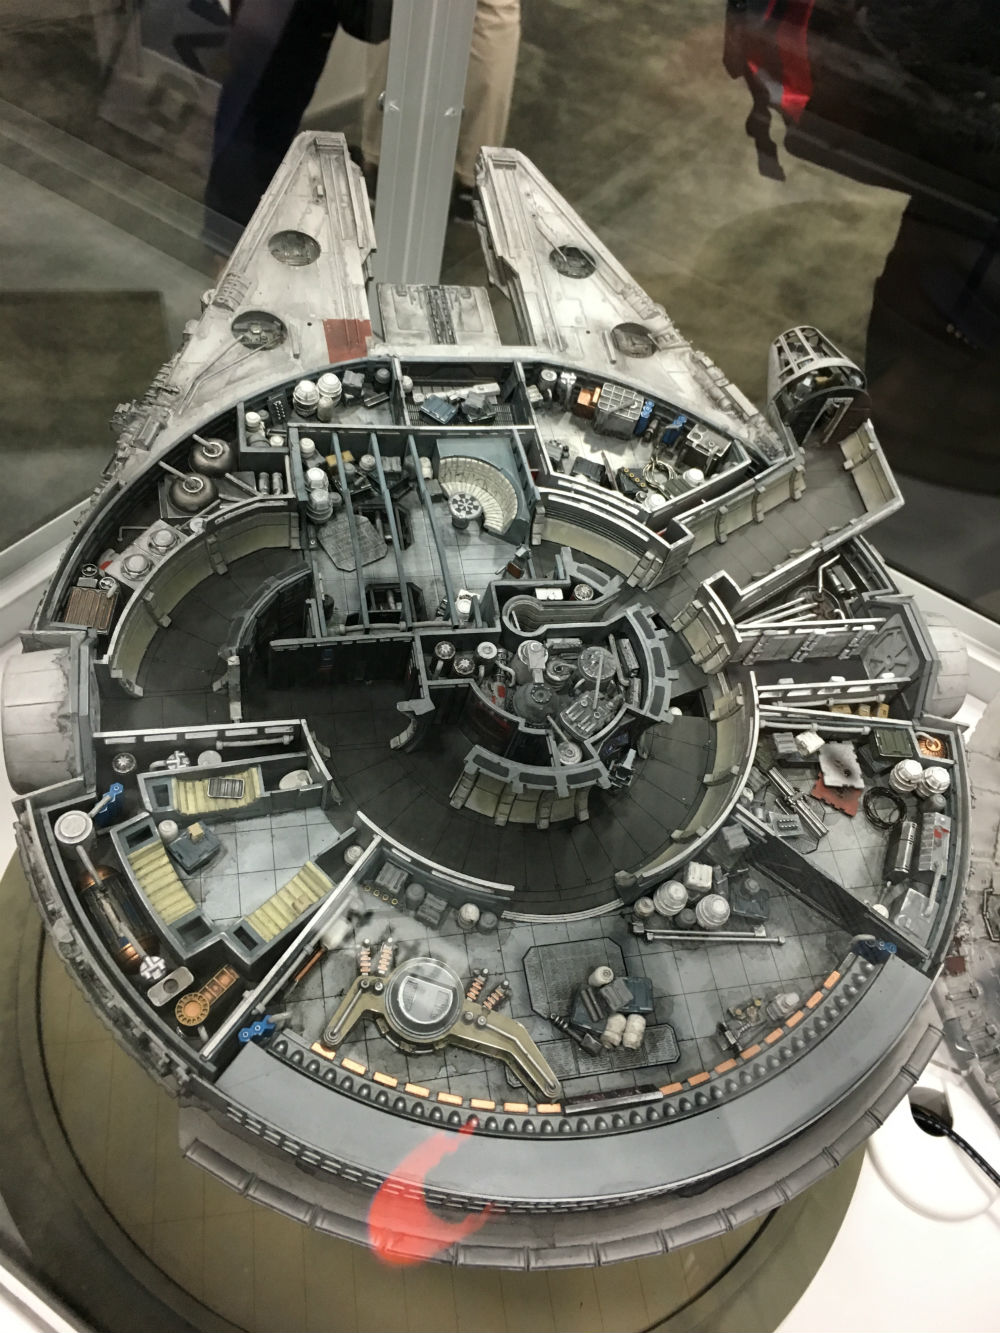 So That’s How The Inside Of The Millennium Falcon Is Laid Out